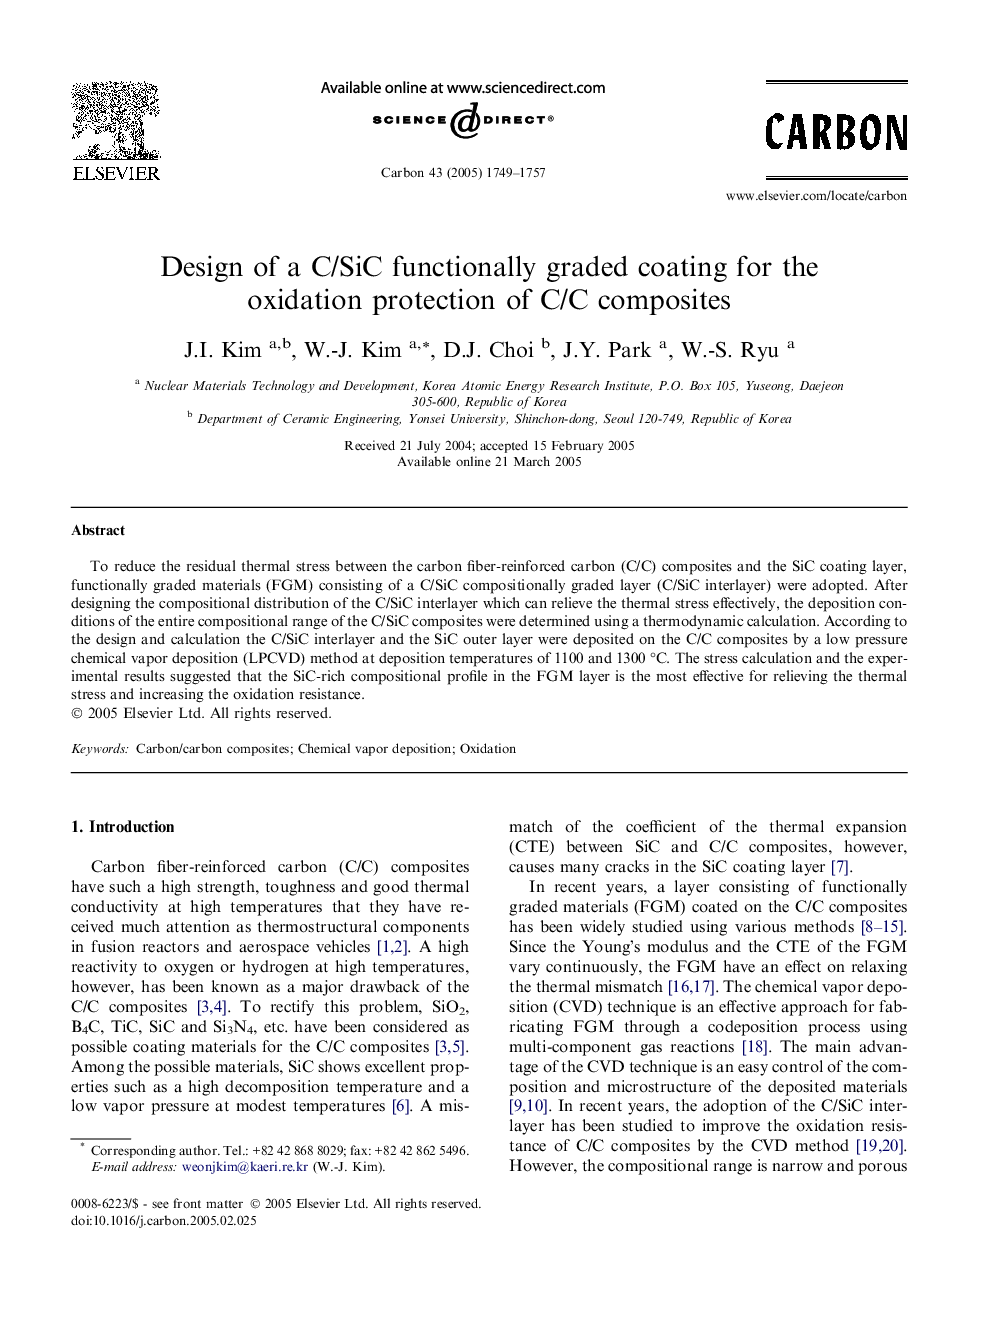 Design of a C/SiC functionally graded coating for the oxidation protection of C/C composites